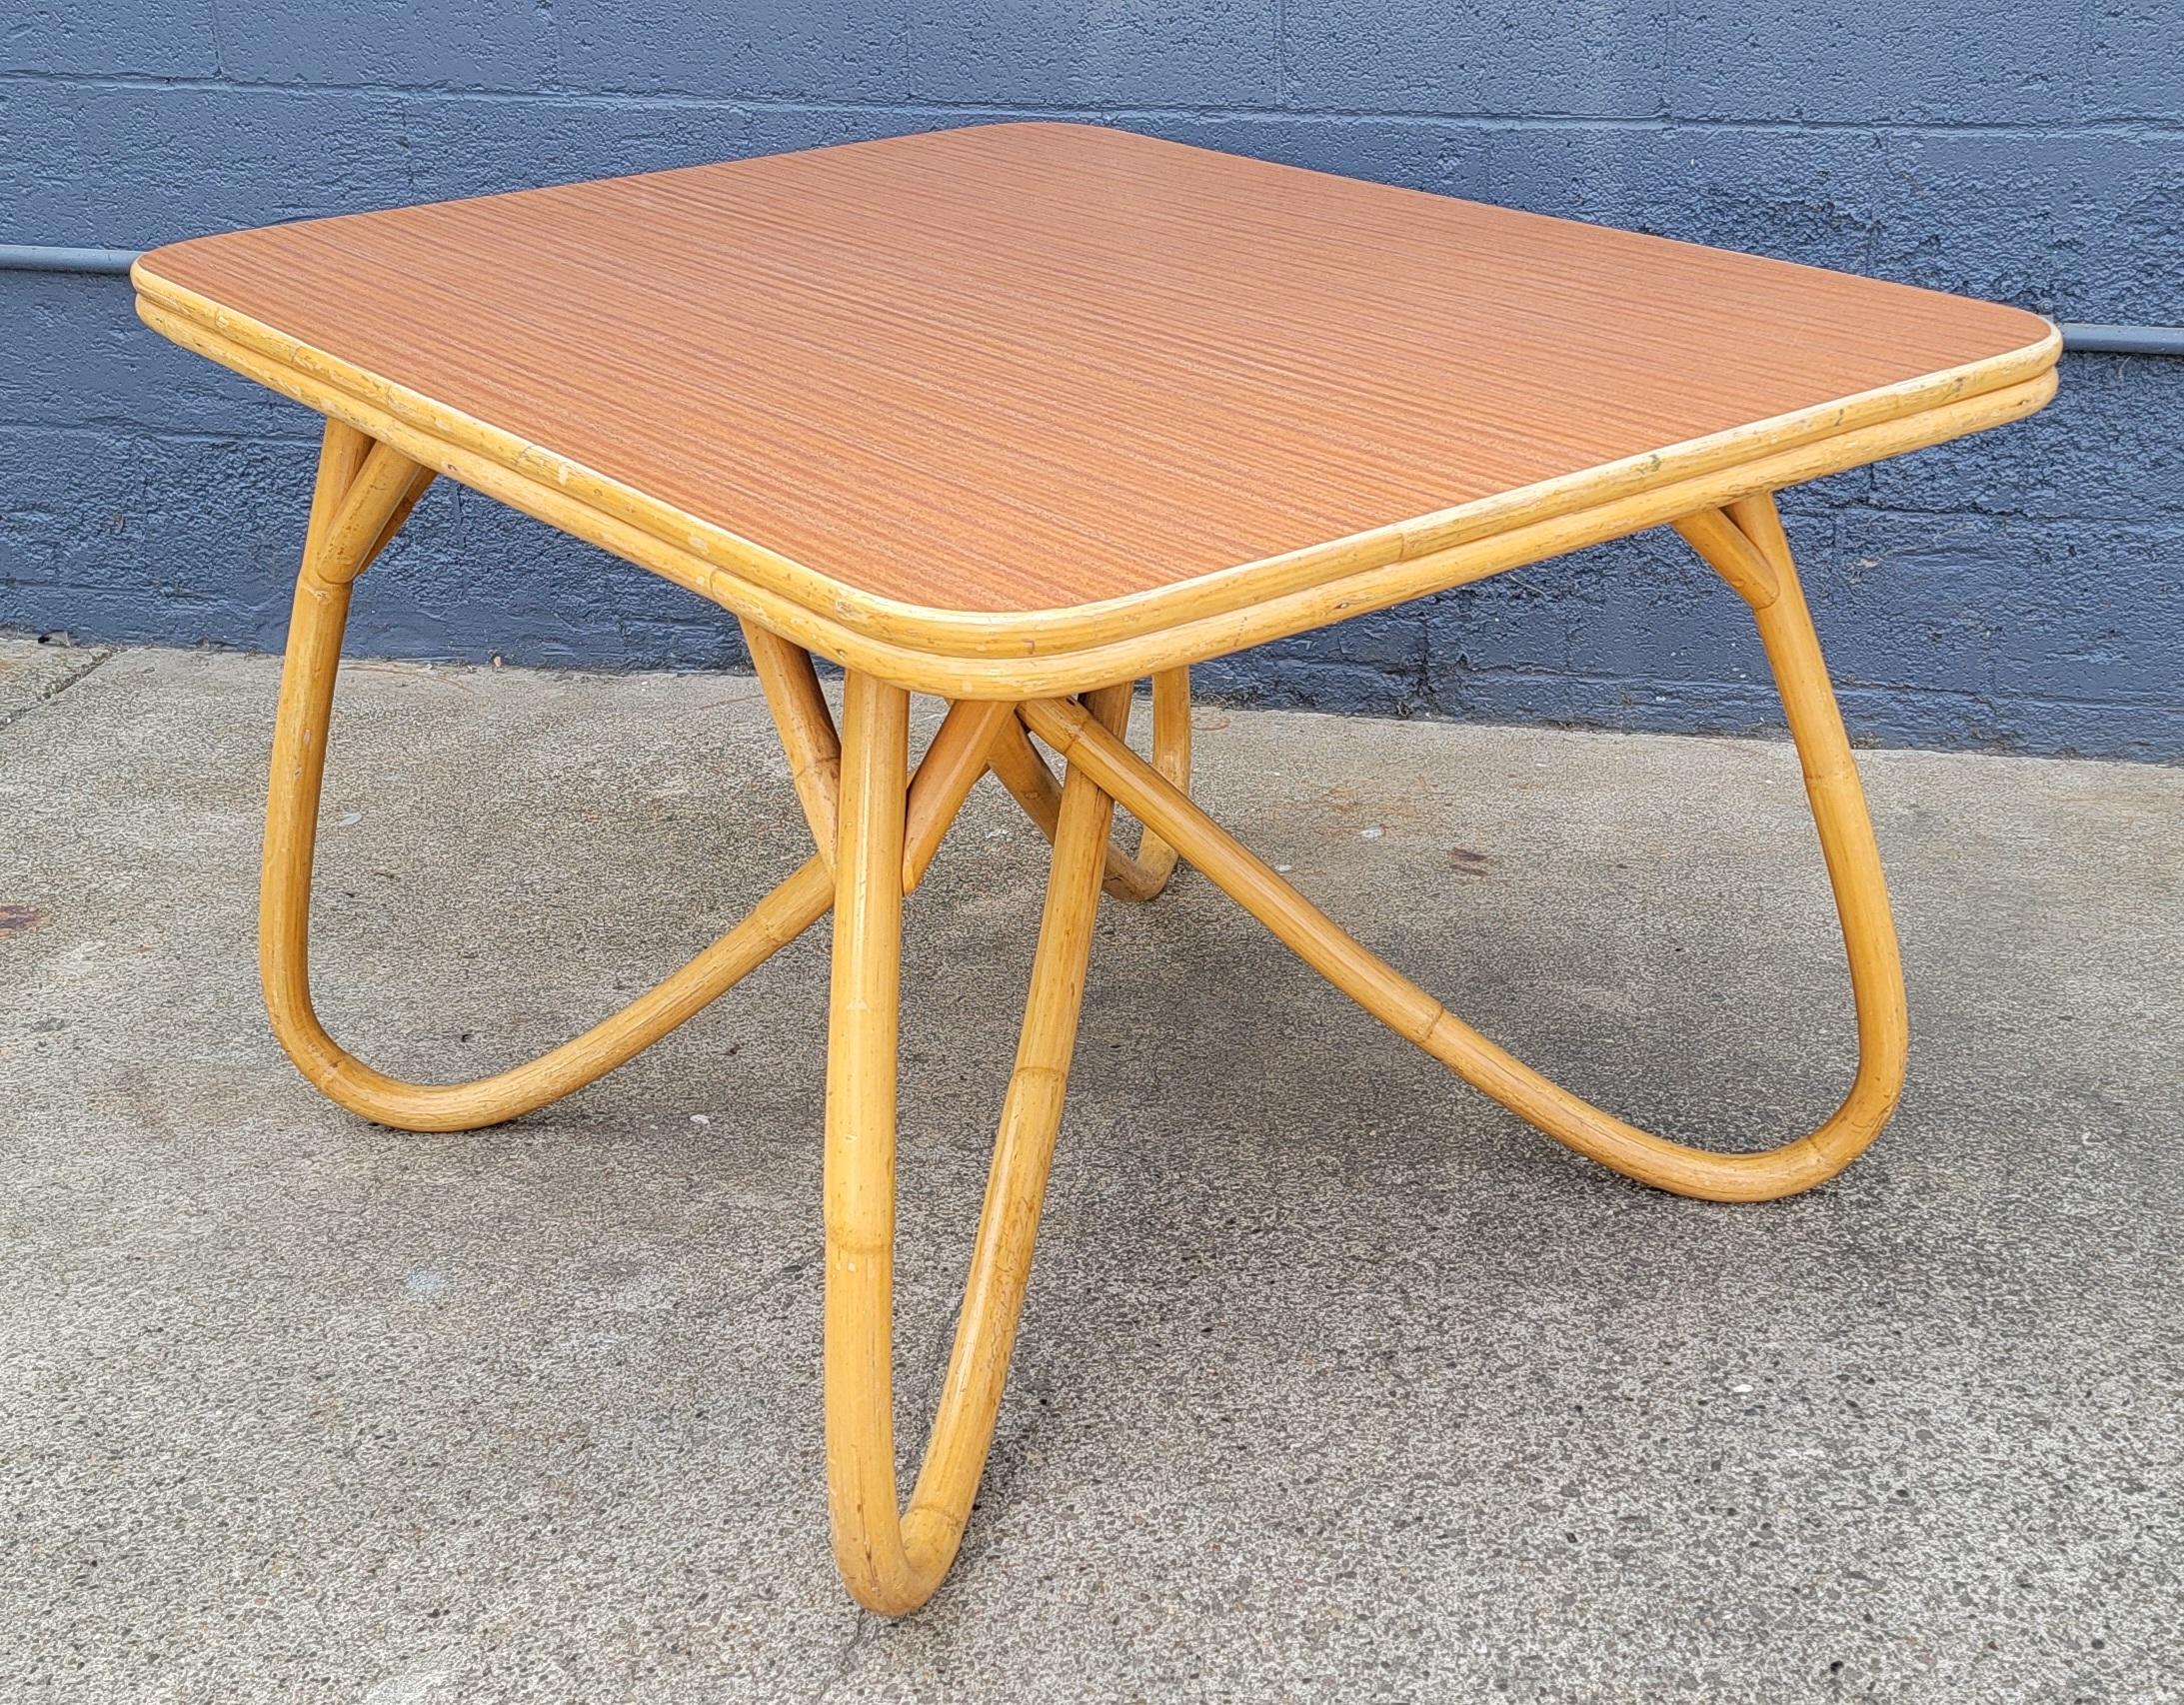 Unusual base to this 1950's bamboo dining table. Faux wood grain Formica top creates an exceptional durable top surface. Very good original condition. Sturdy.